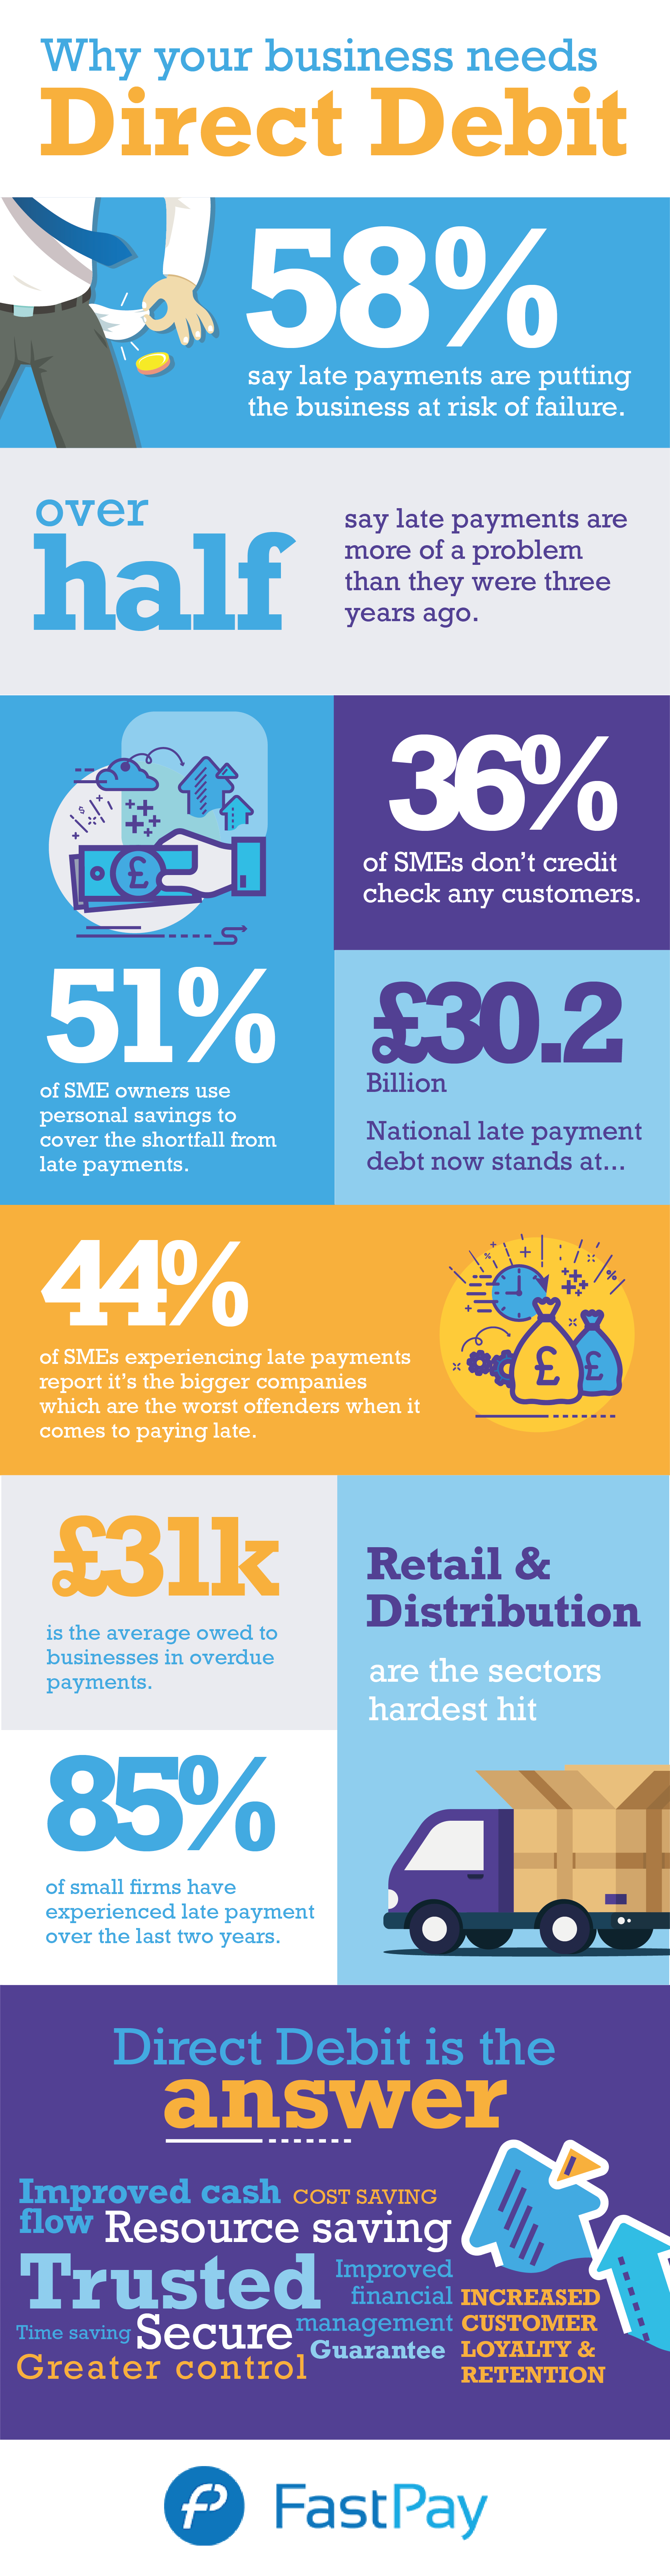 Why your business needs Direct Debit